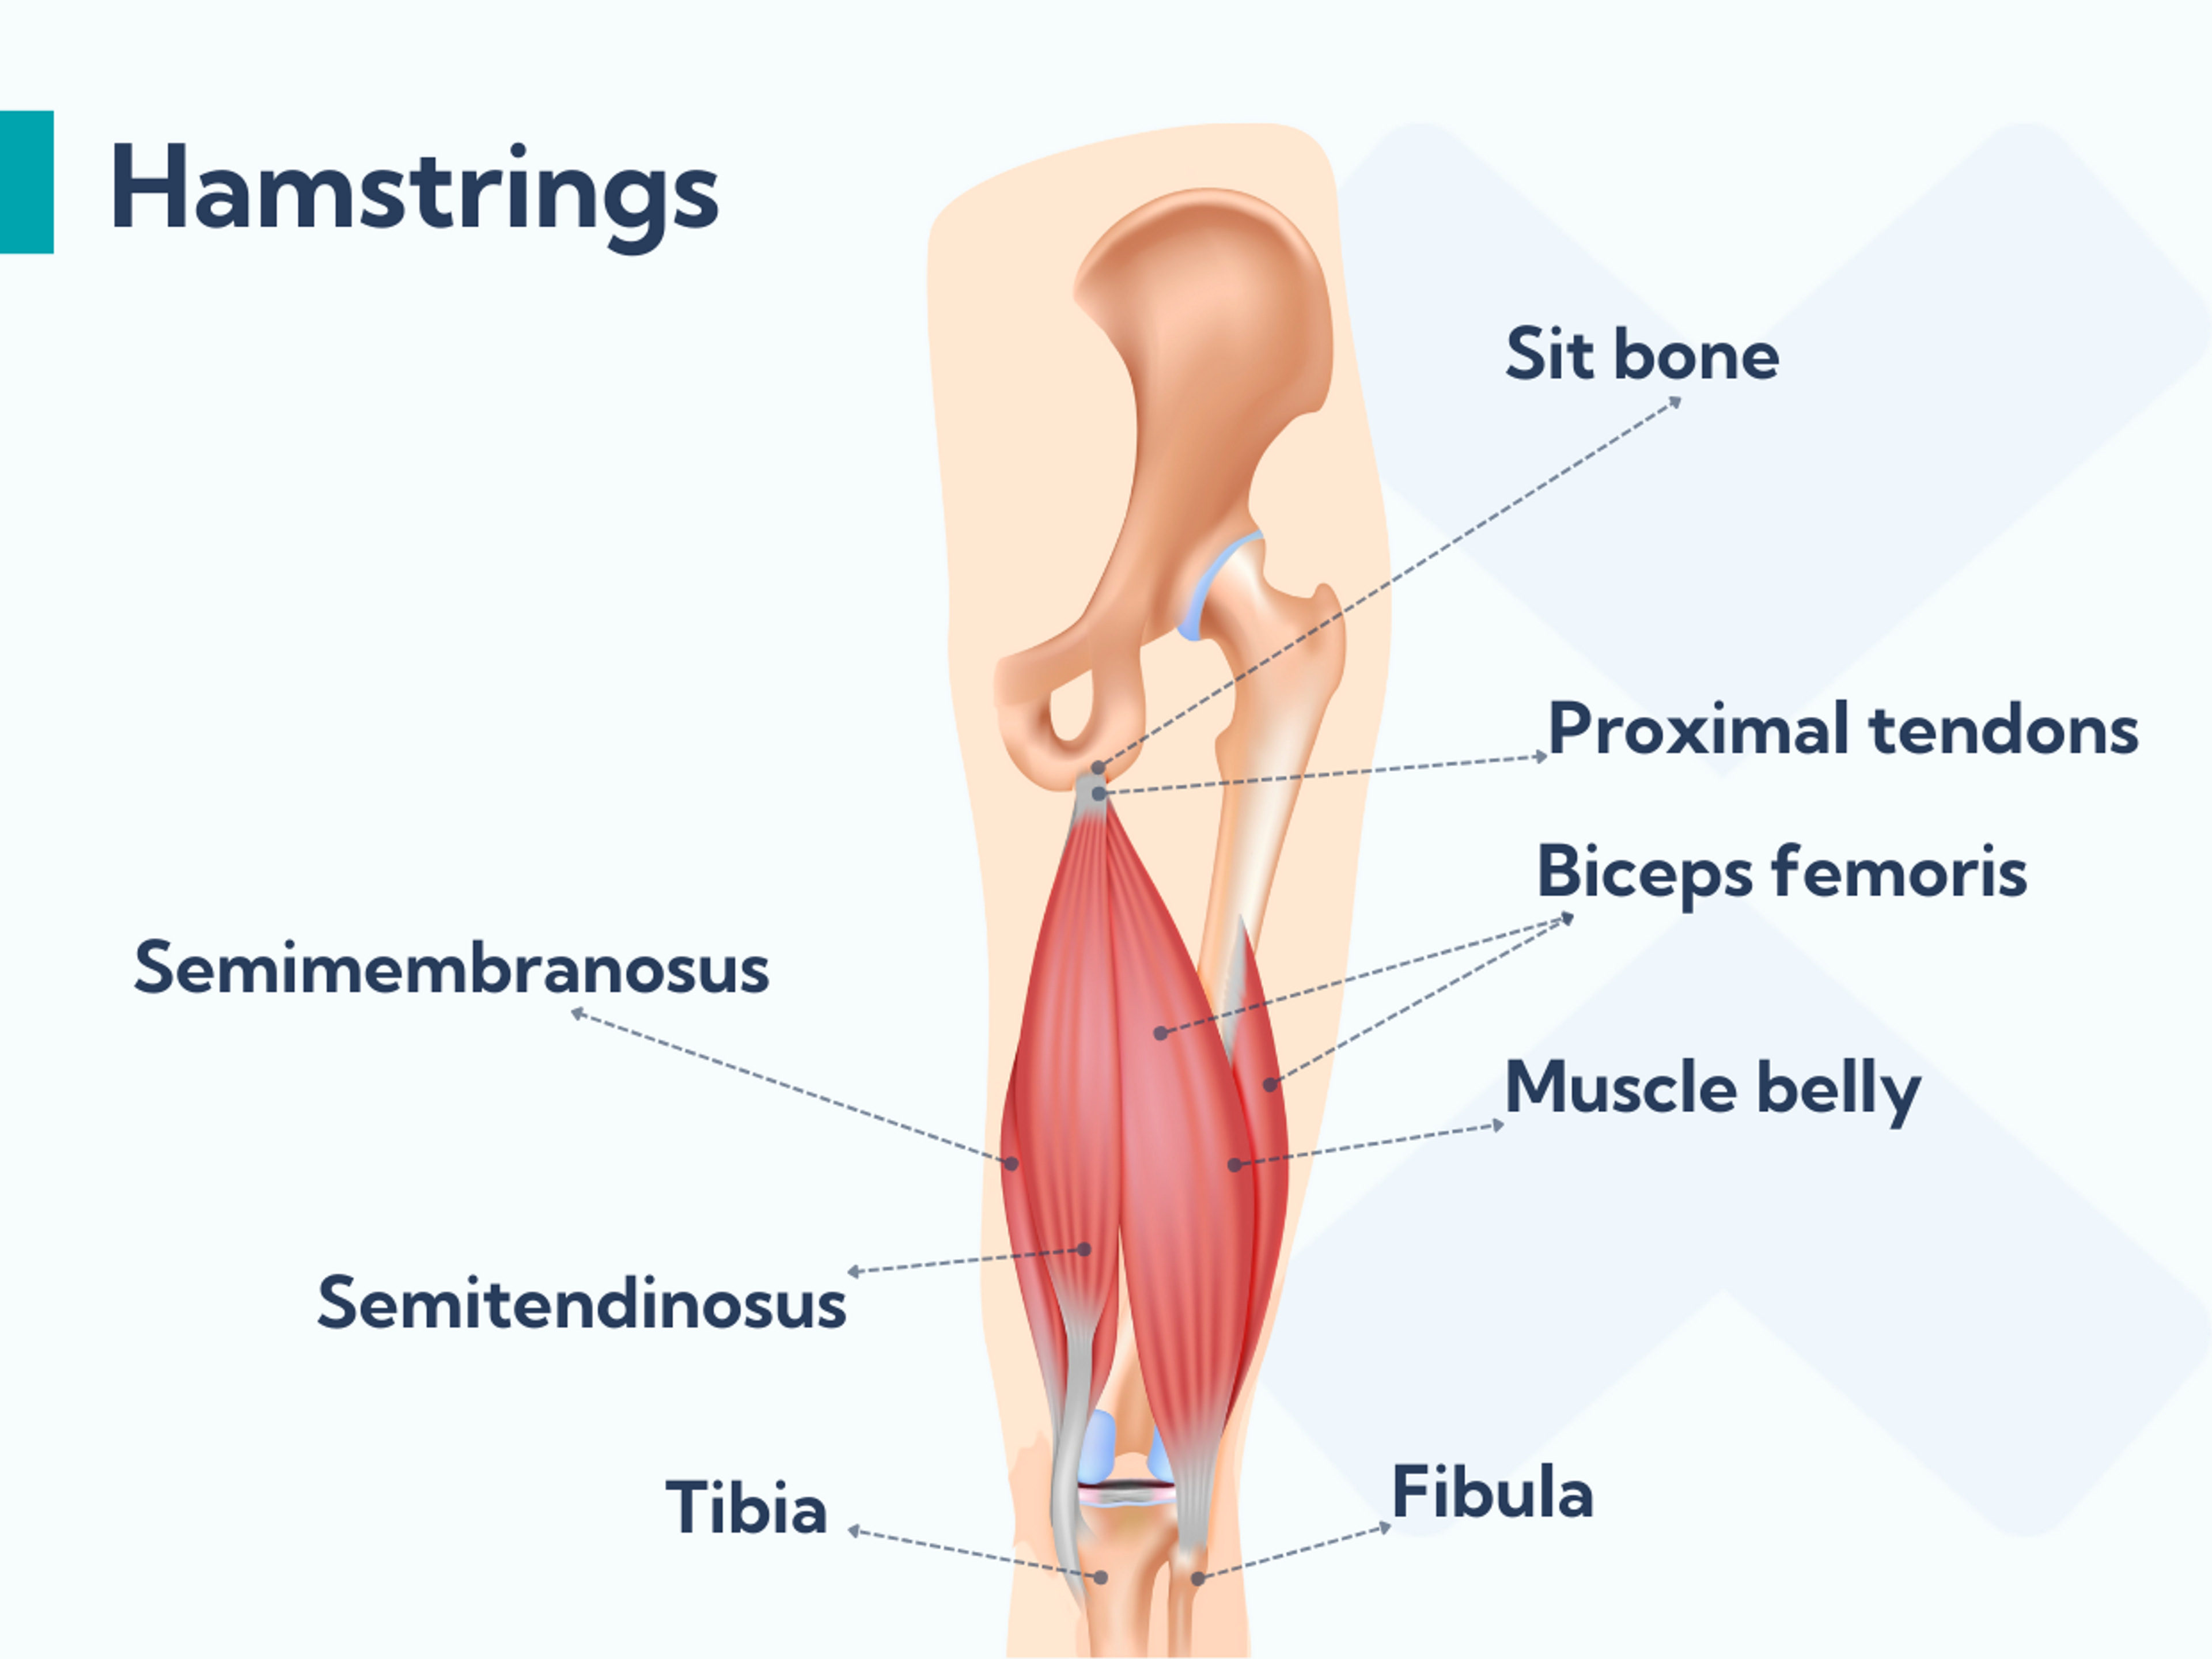 Anatomy of the hamstring muscles.